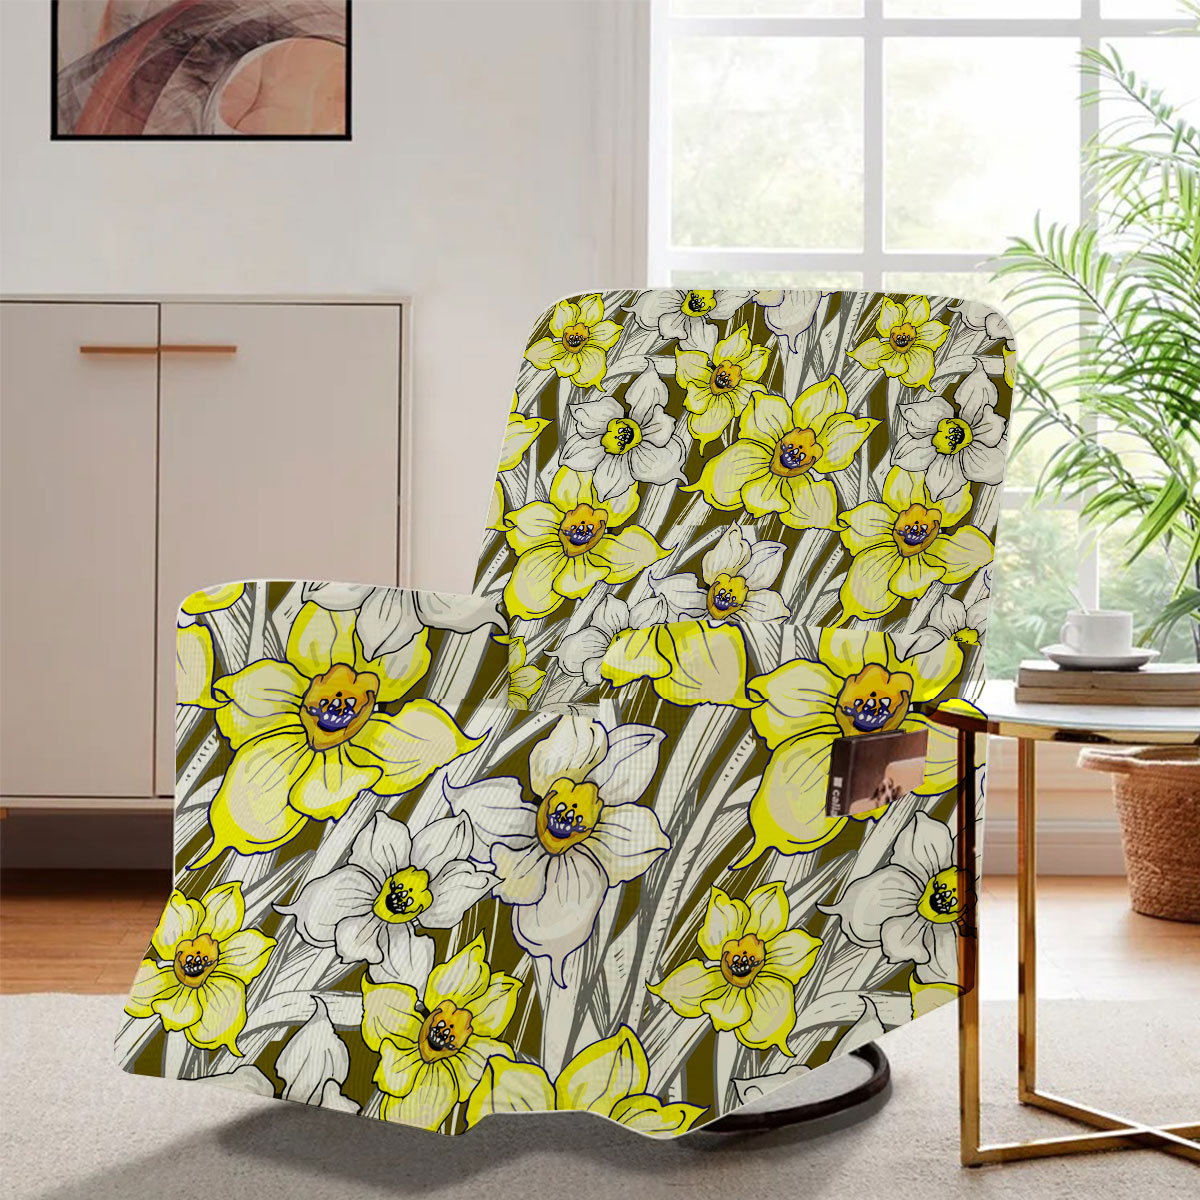 Botanical With Flowers Of Narcissus Daffodil Recliner Slipcover